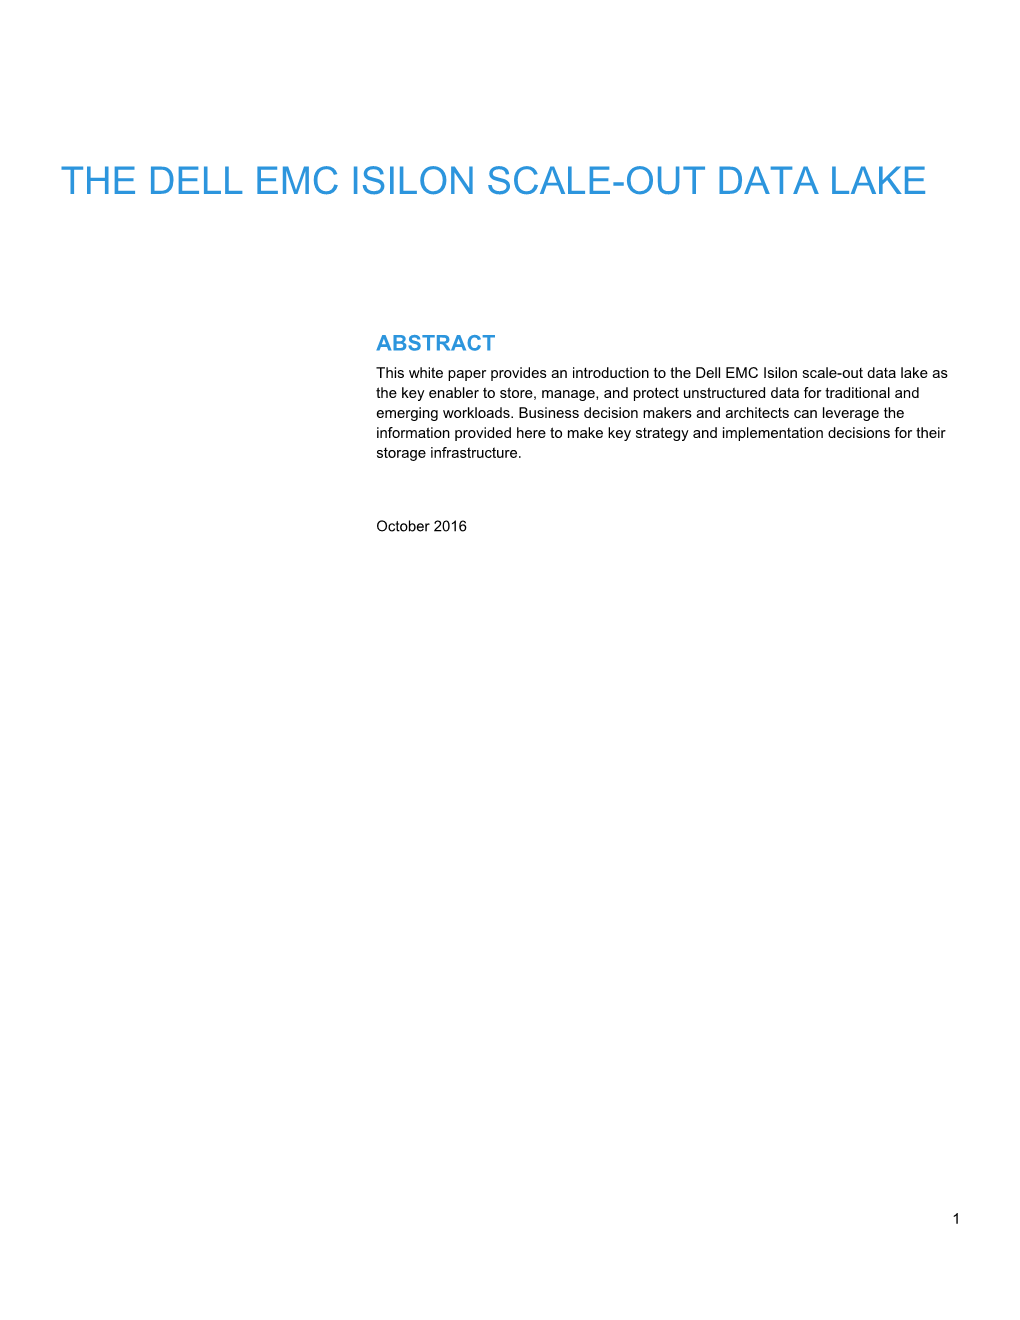 The Dell Emc Isilon Scale-Out Data Lake